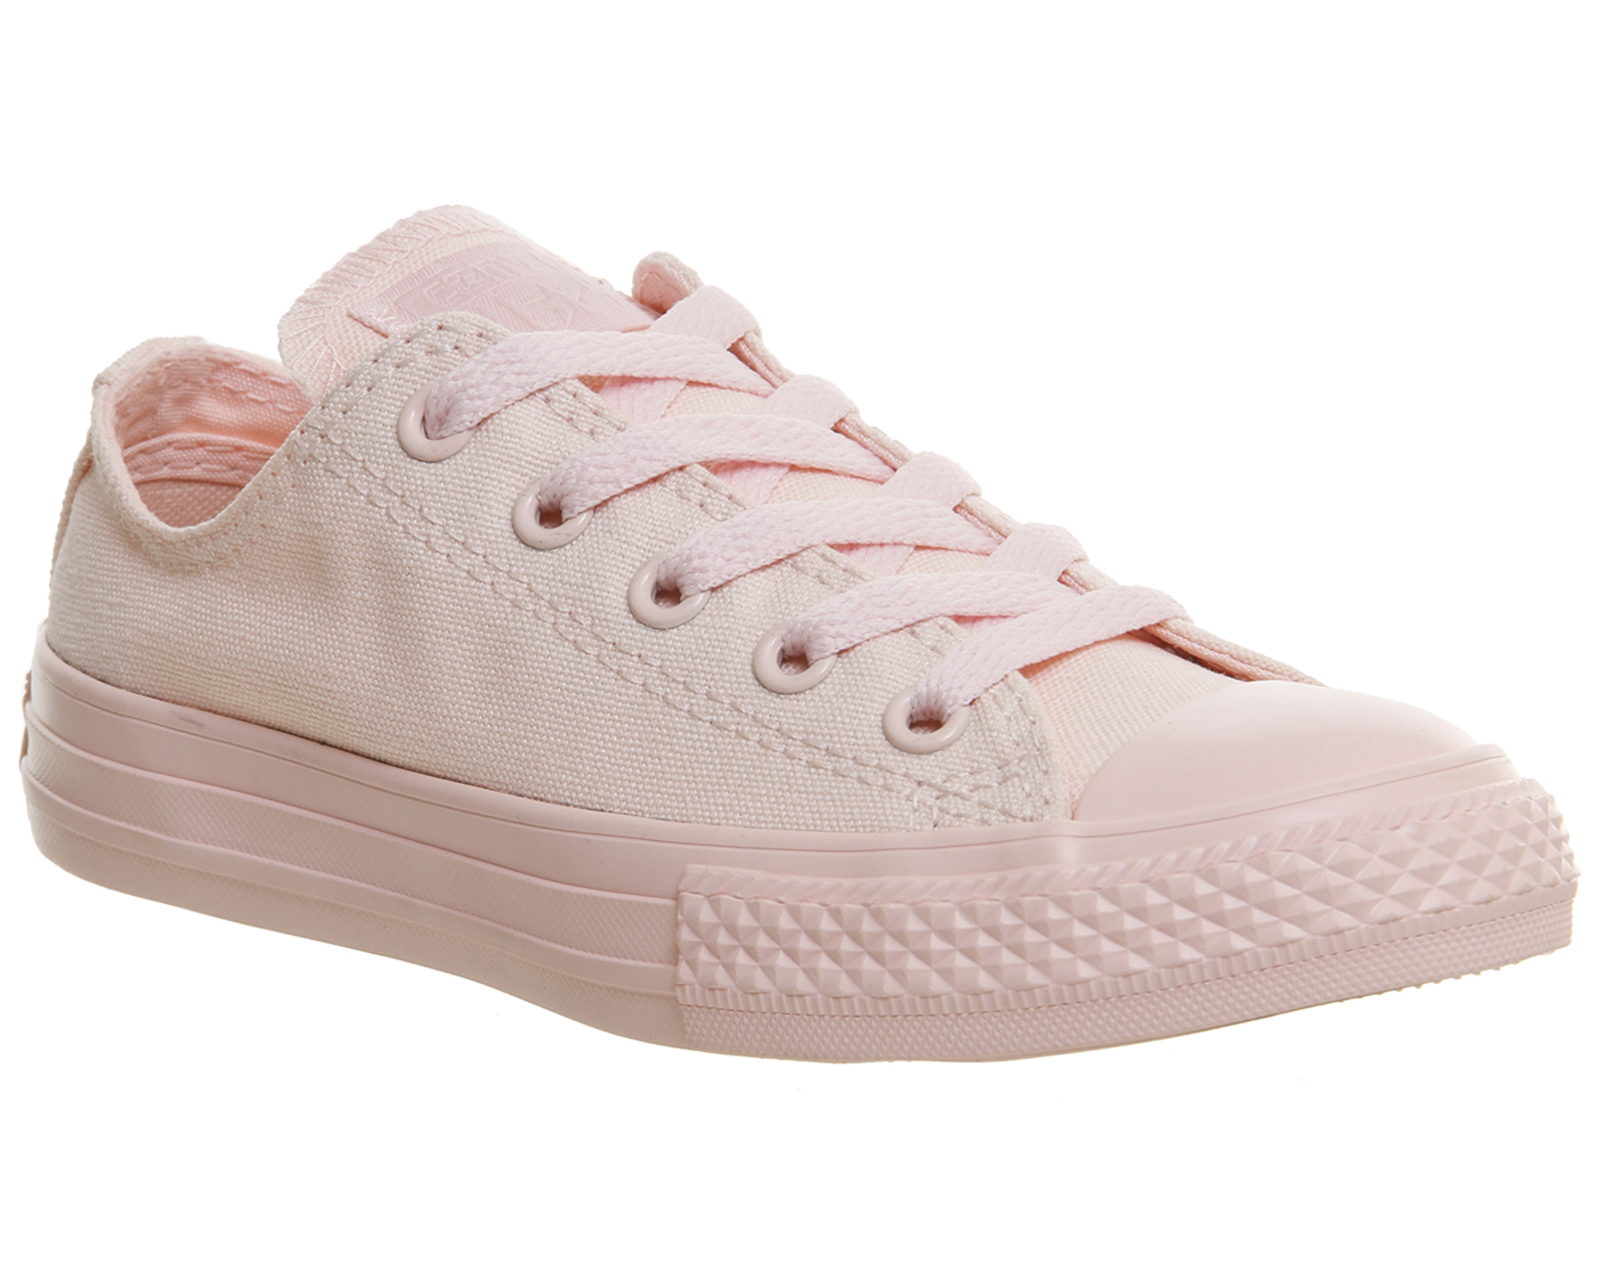 Converse All Star Low Youth Vapour Pink Mono Exclusive - Unisex